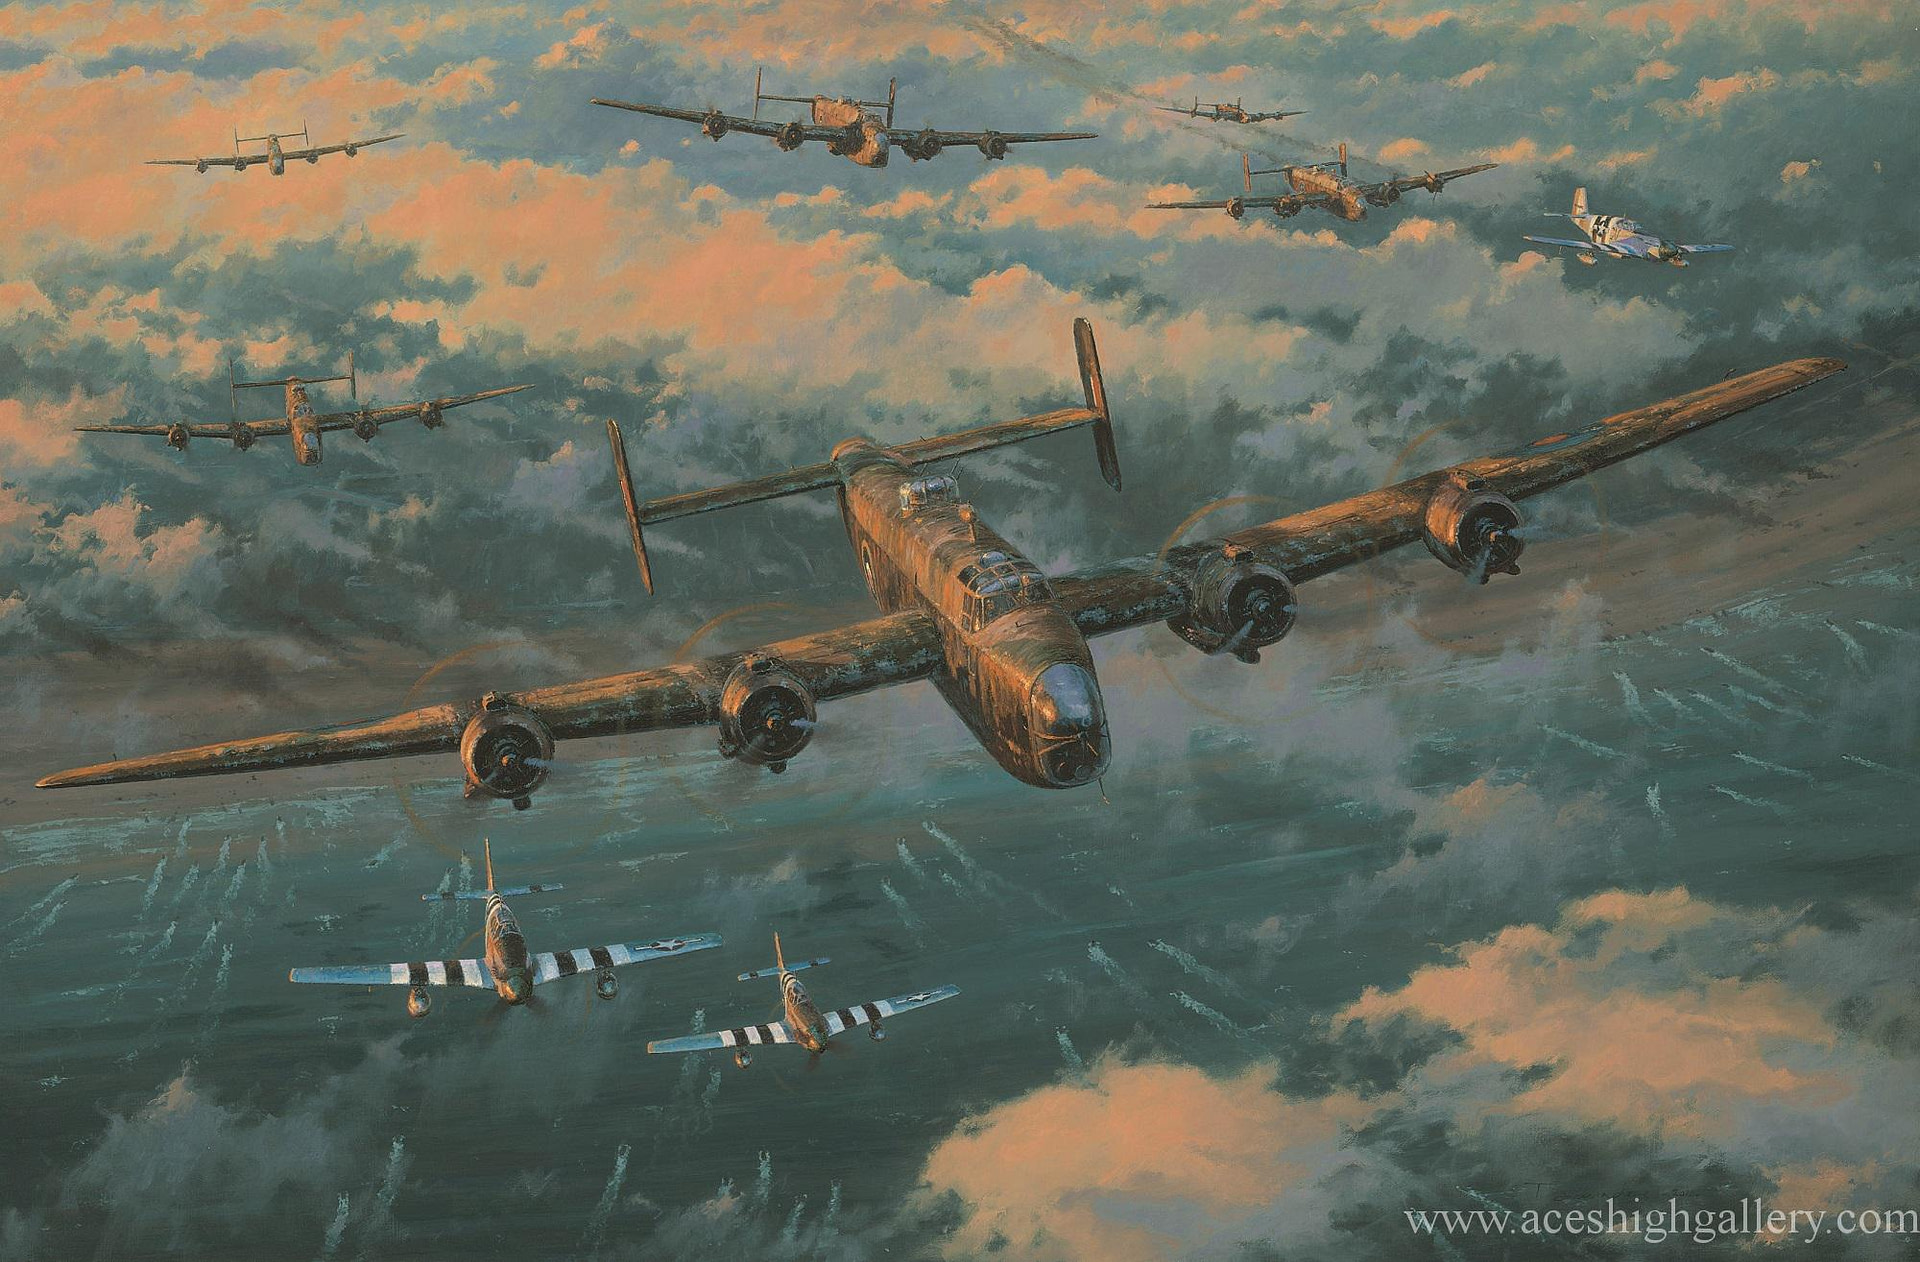 DAWN BREAKERS | The foremost authority on Aviation and Military Art